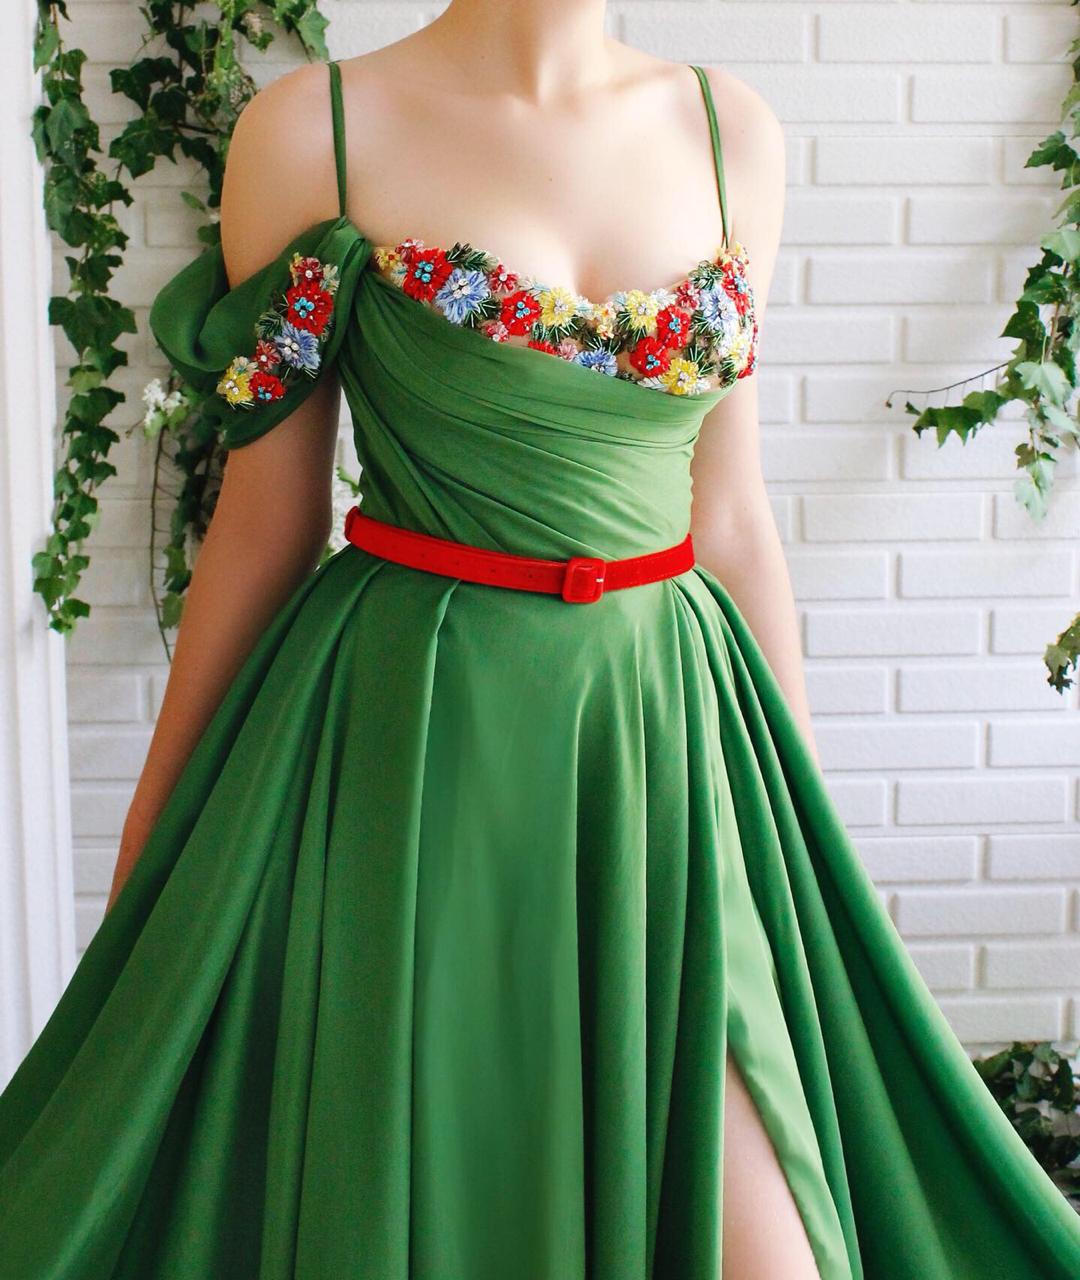 Green A-Line dress with belt, off the shoulder sleeves, spaghetti straps and embroidery